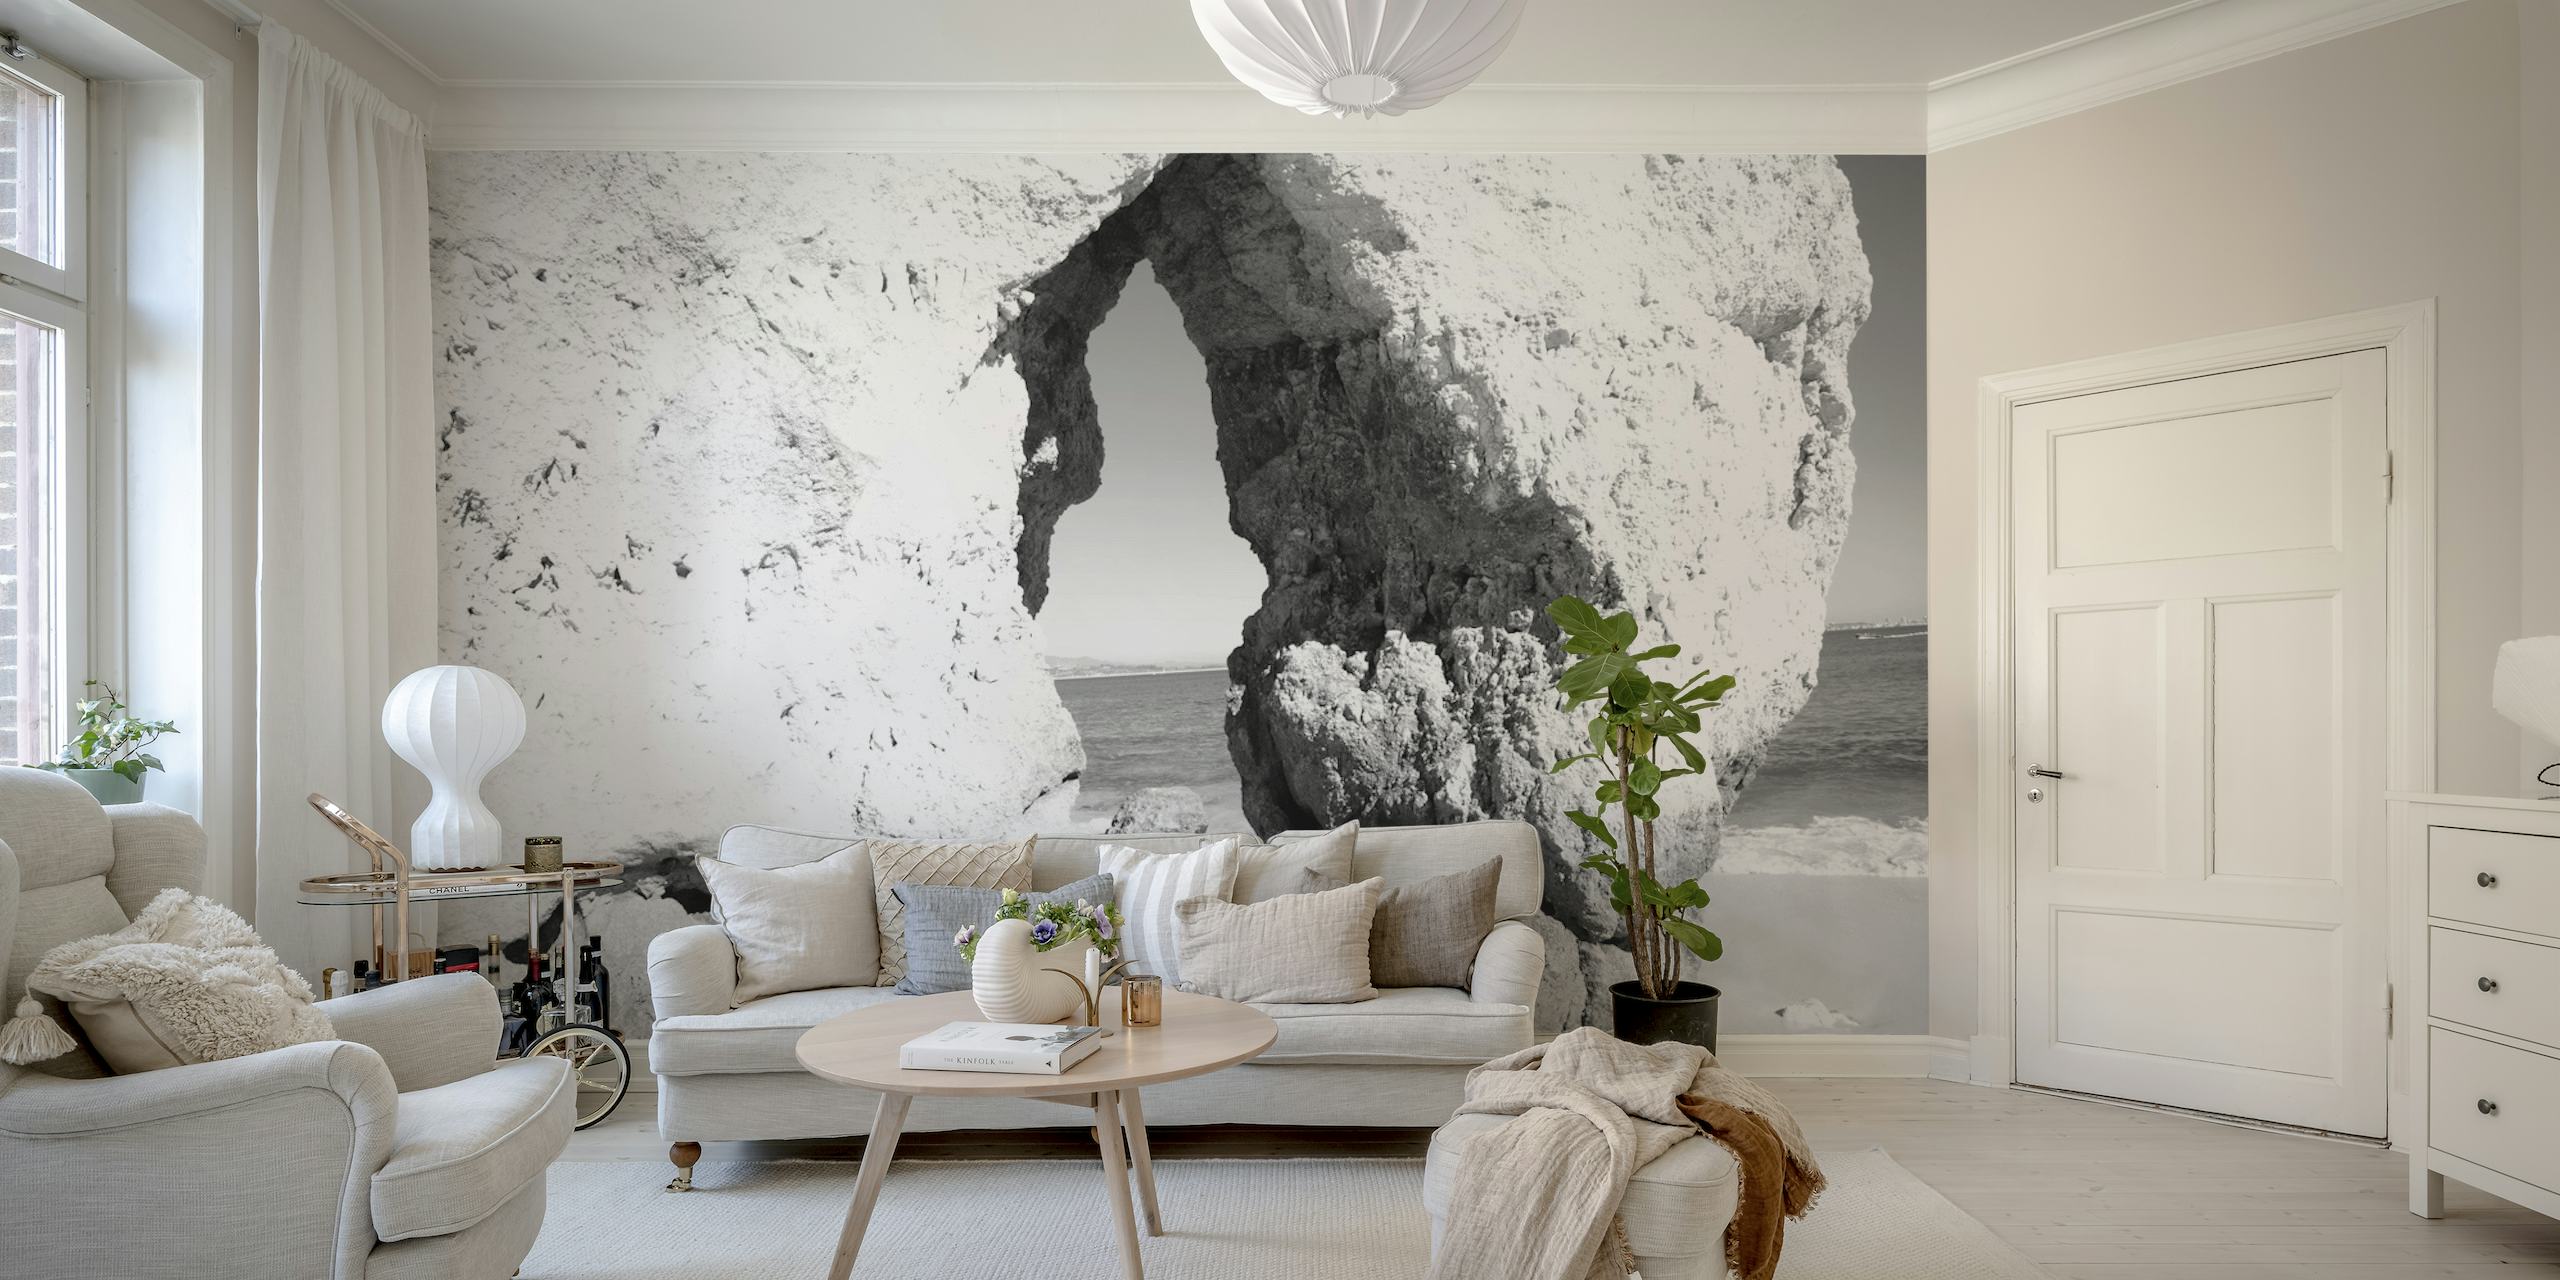 Monochrome wall mural of the natural arch at Camilo Beach in Portugal